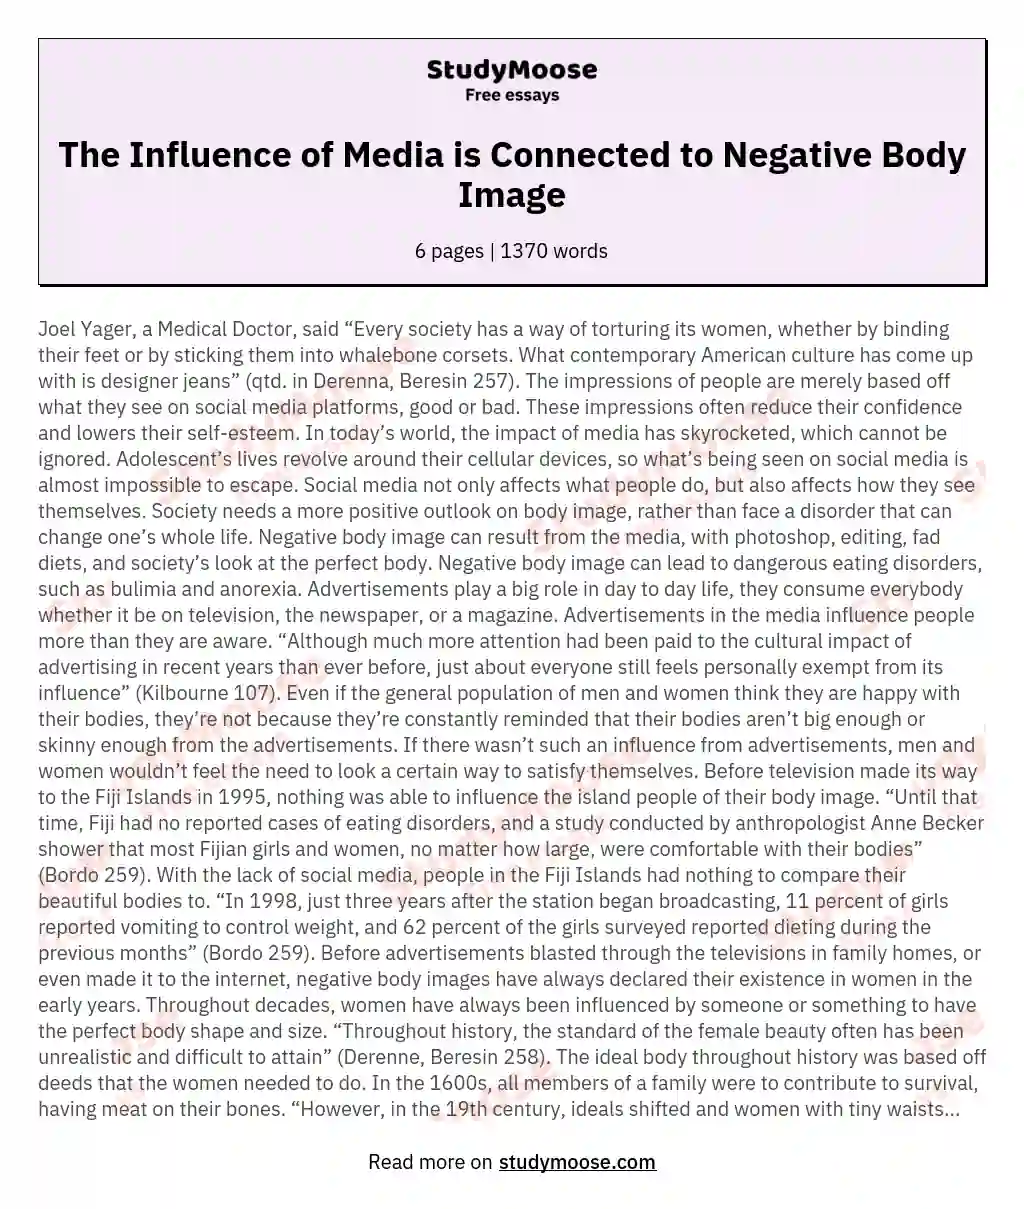 The Influence of Media is Connected to Negative Body Image